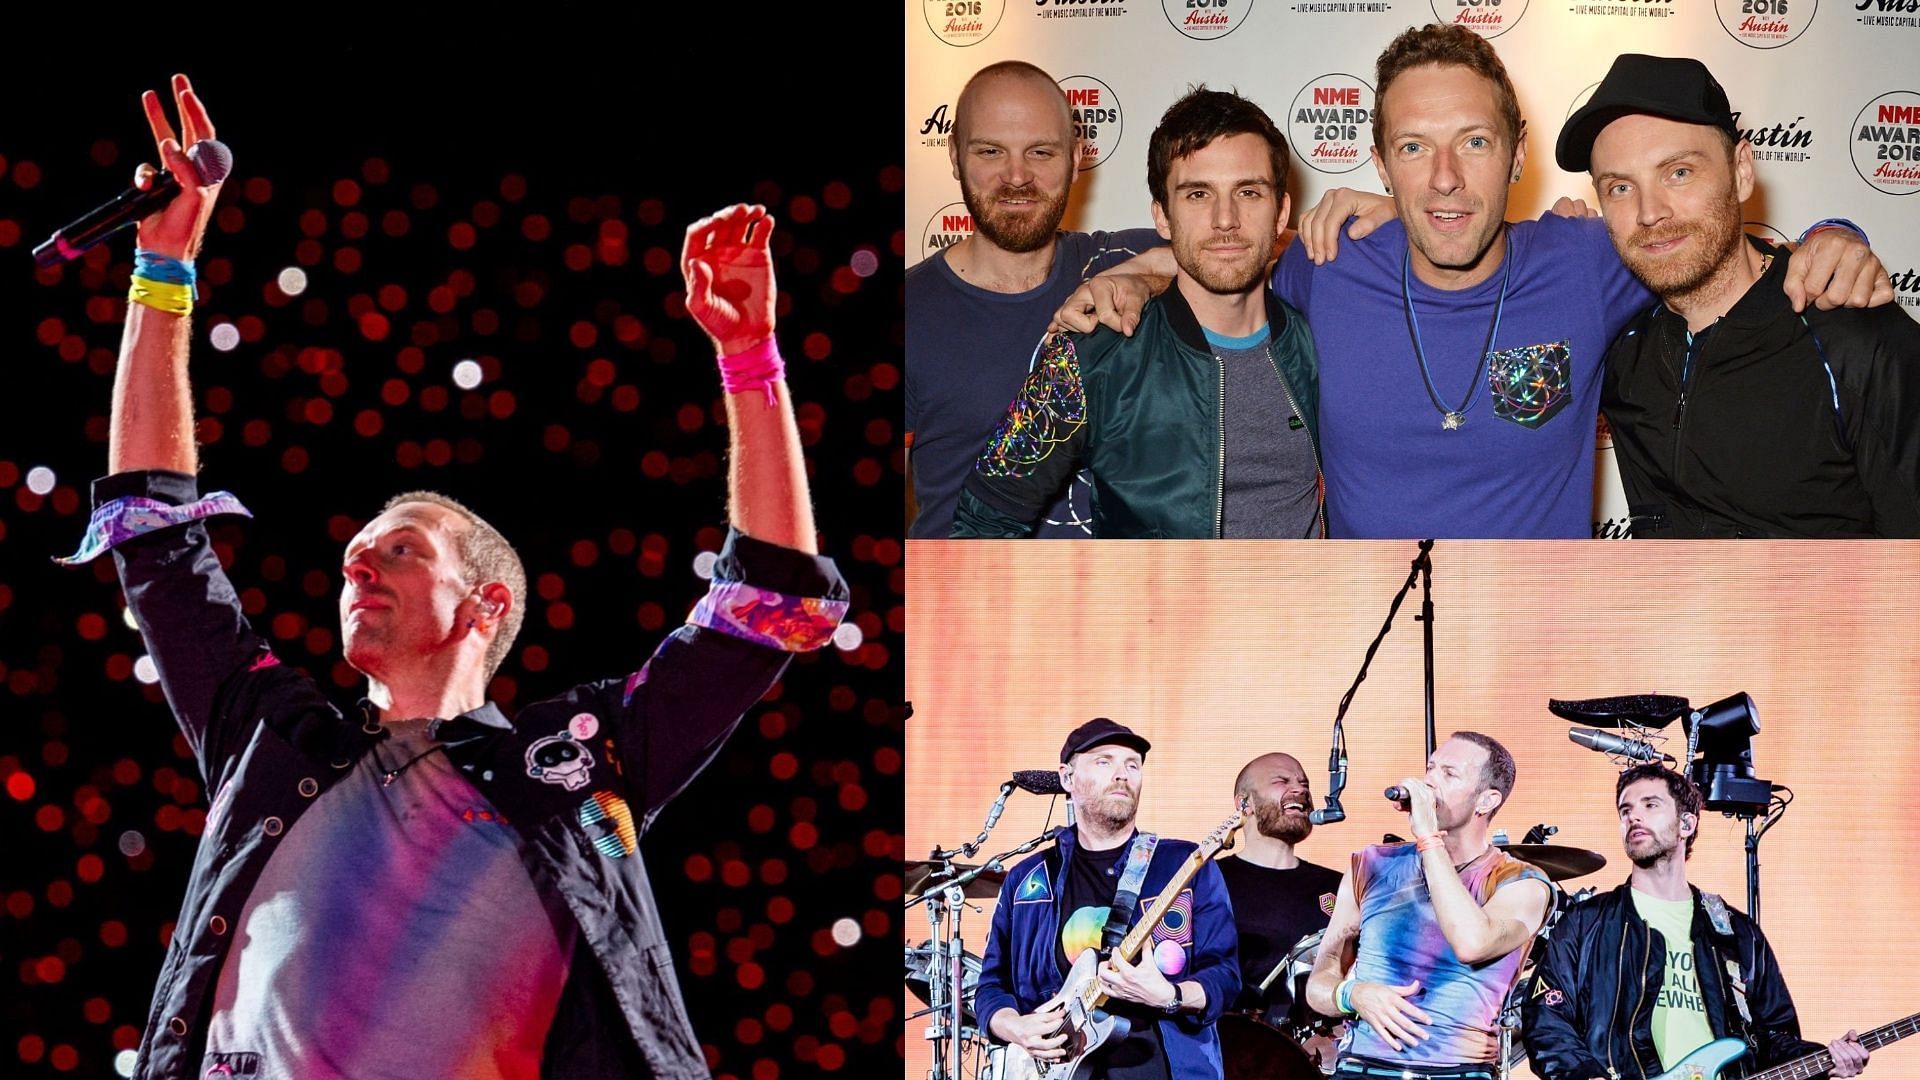 Coldplay is getting sued by their former manager for 12 million dollars. (Images via Getty Images)